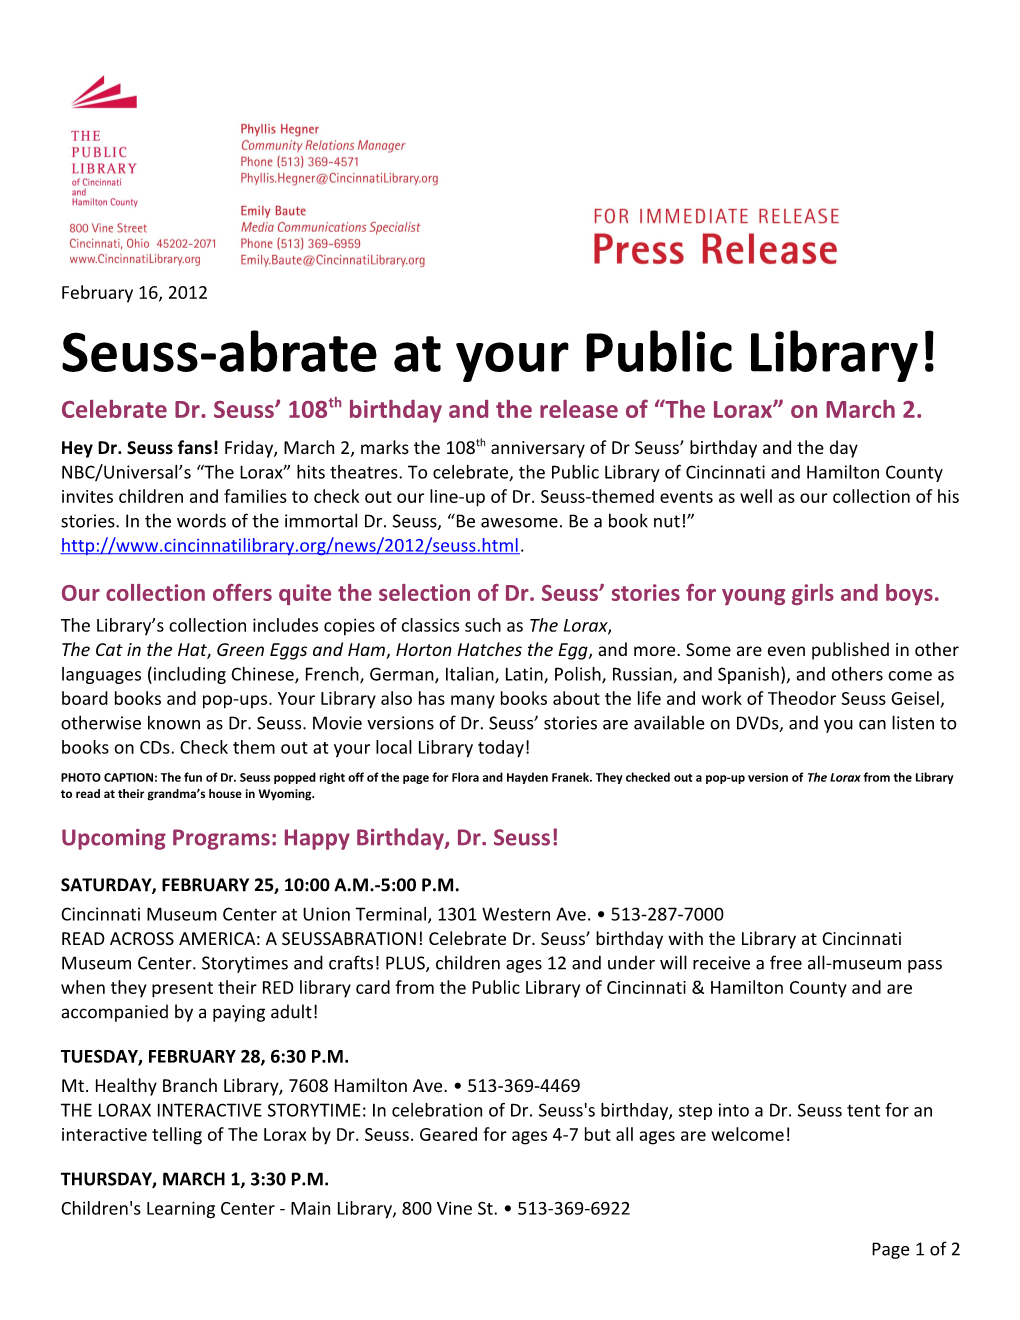 Seuss-Abrate at Your Public Library!